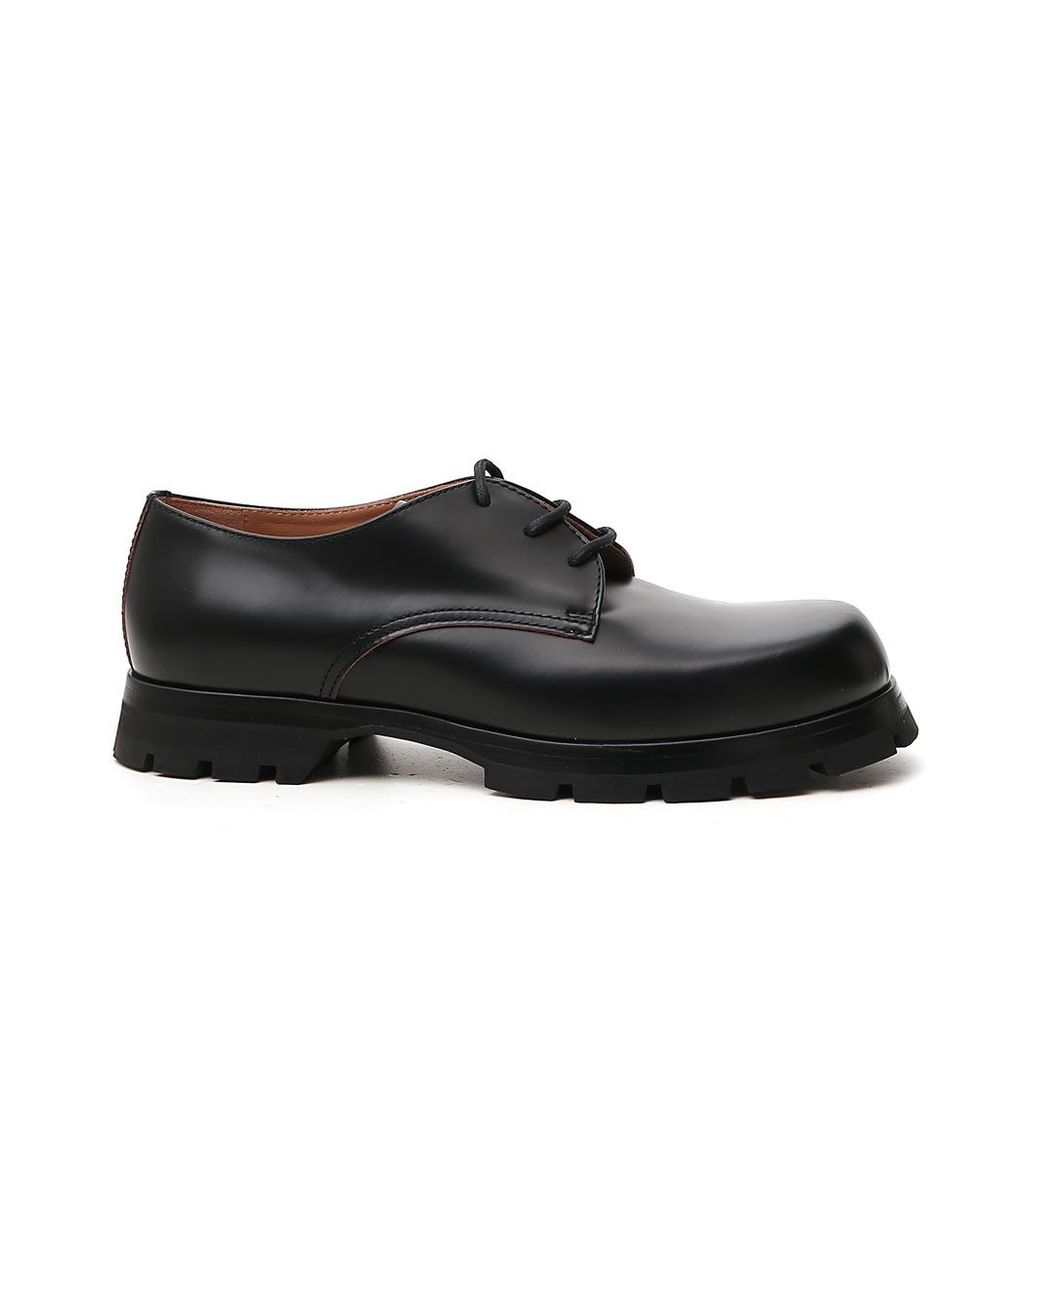 Jil Sander Leather Chunky Sole Derby Shoes in Black for Men - Lyst